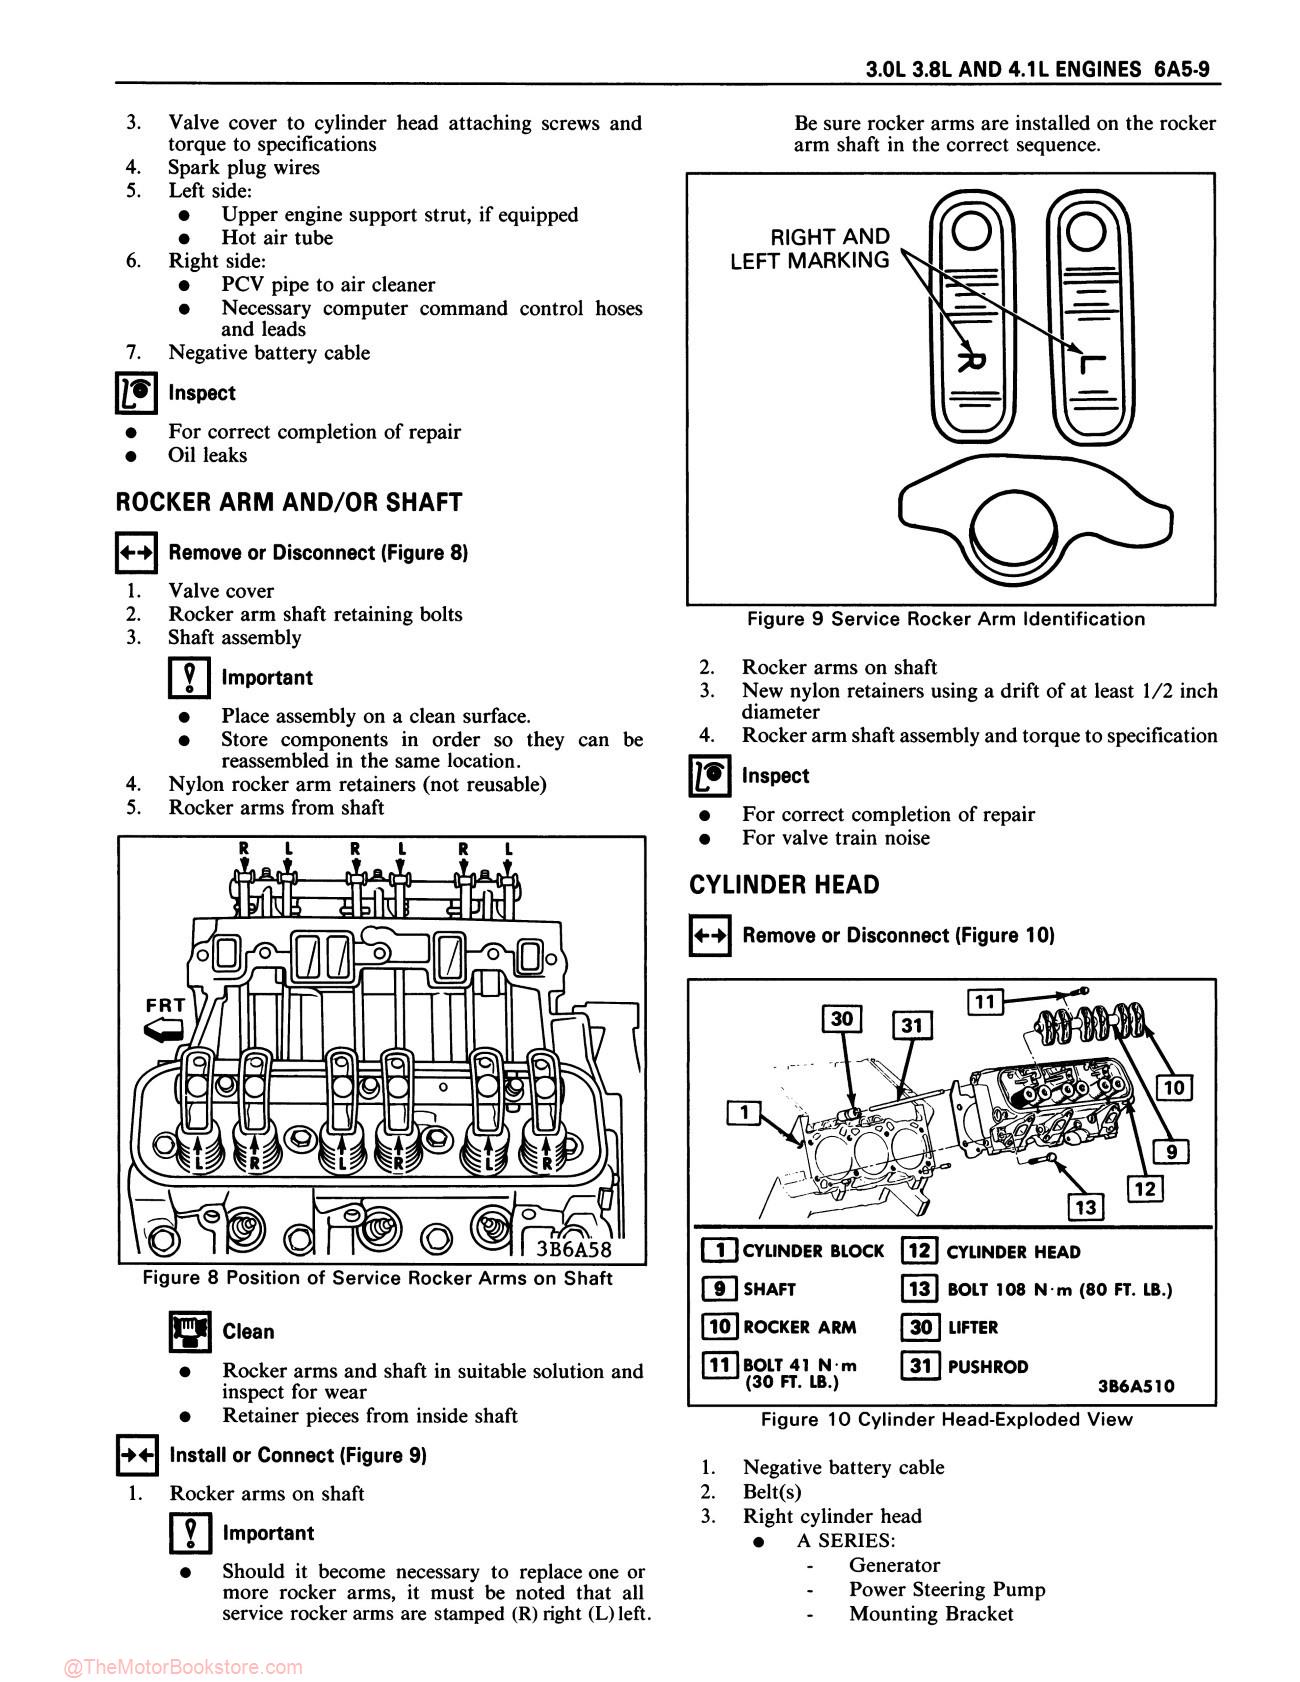 1983 Buick Service Manual All Models - Sample Page 1